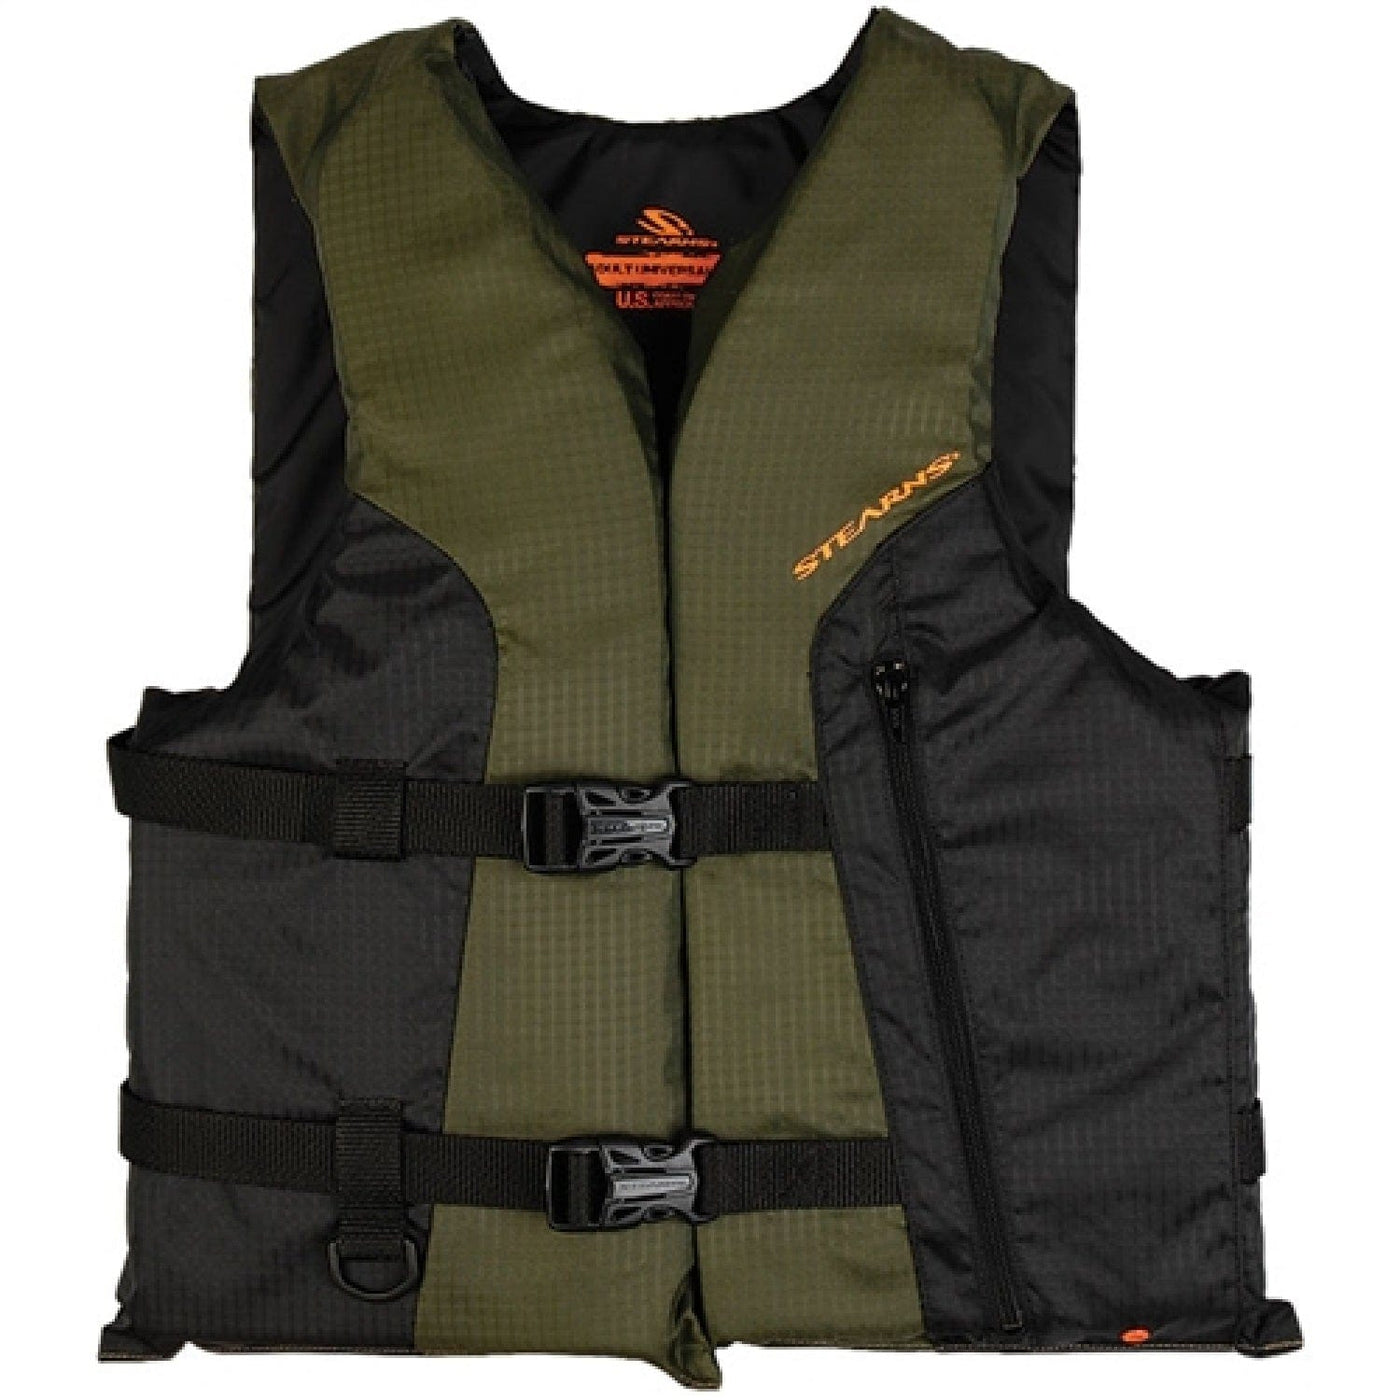 Stearns Stearns Pfd 4100 Vest Universal Grn 2000013809 Marine And Water Sports